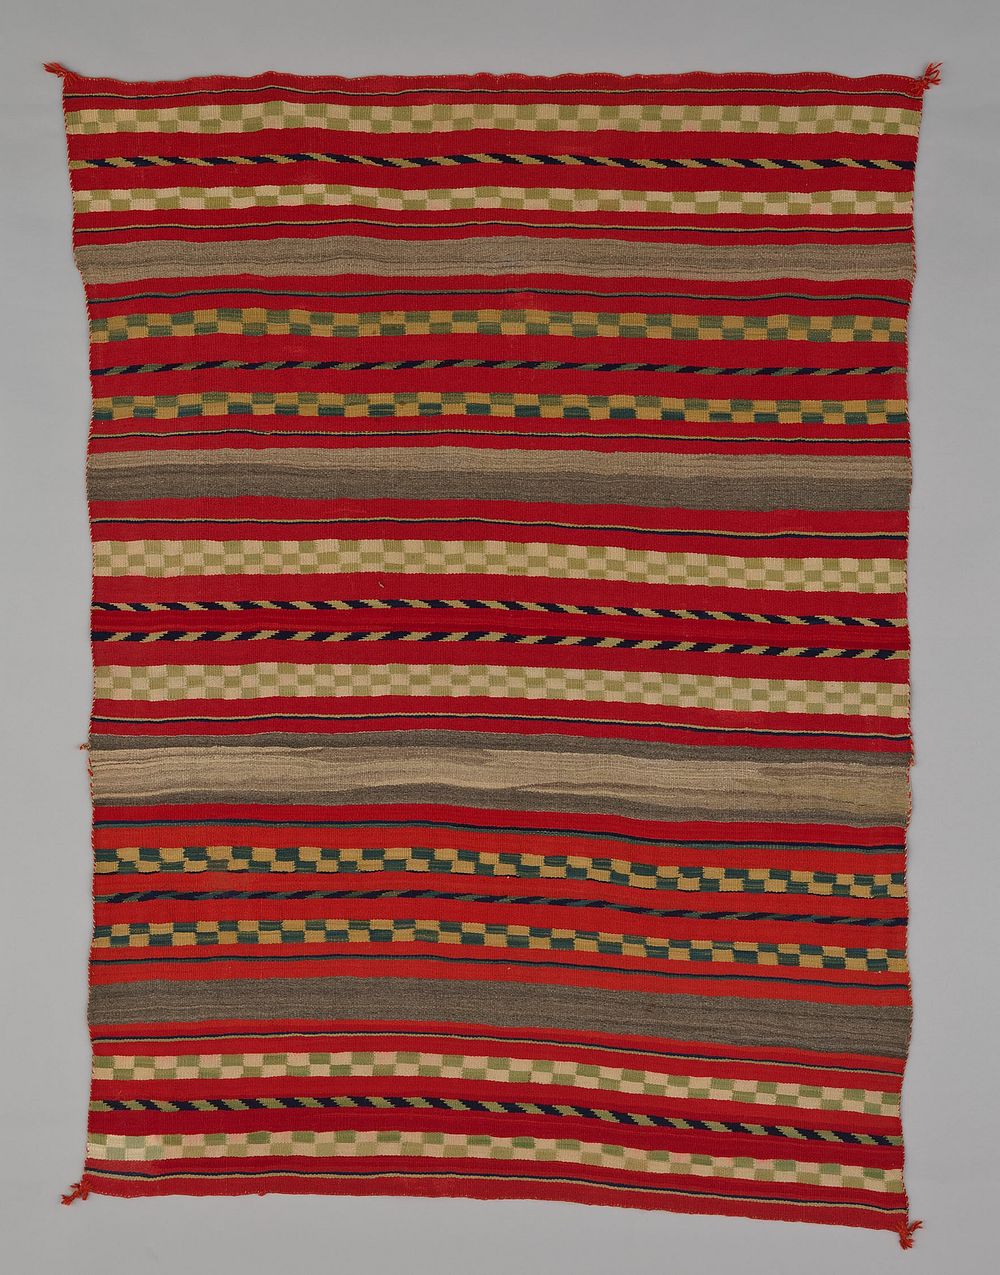 Sarape with Compound Banded Design by Navajo (Diné)